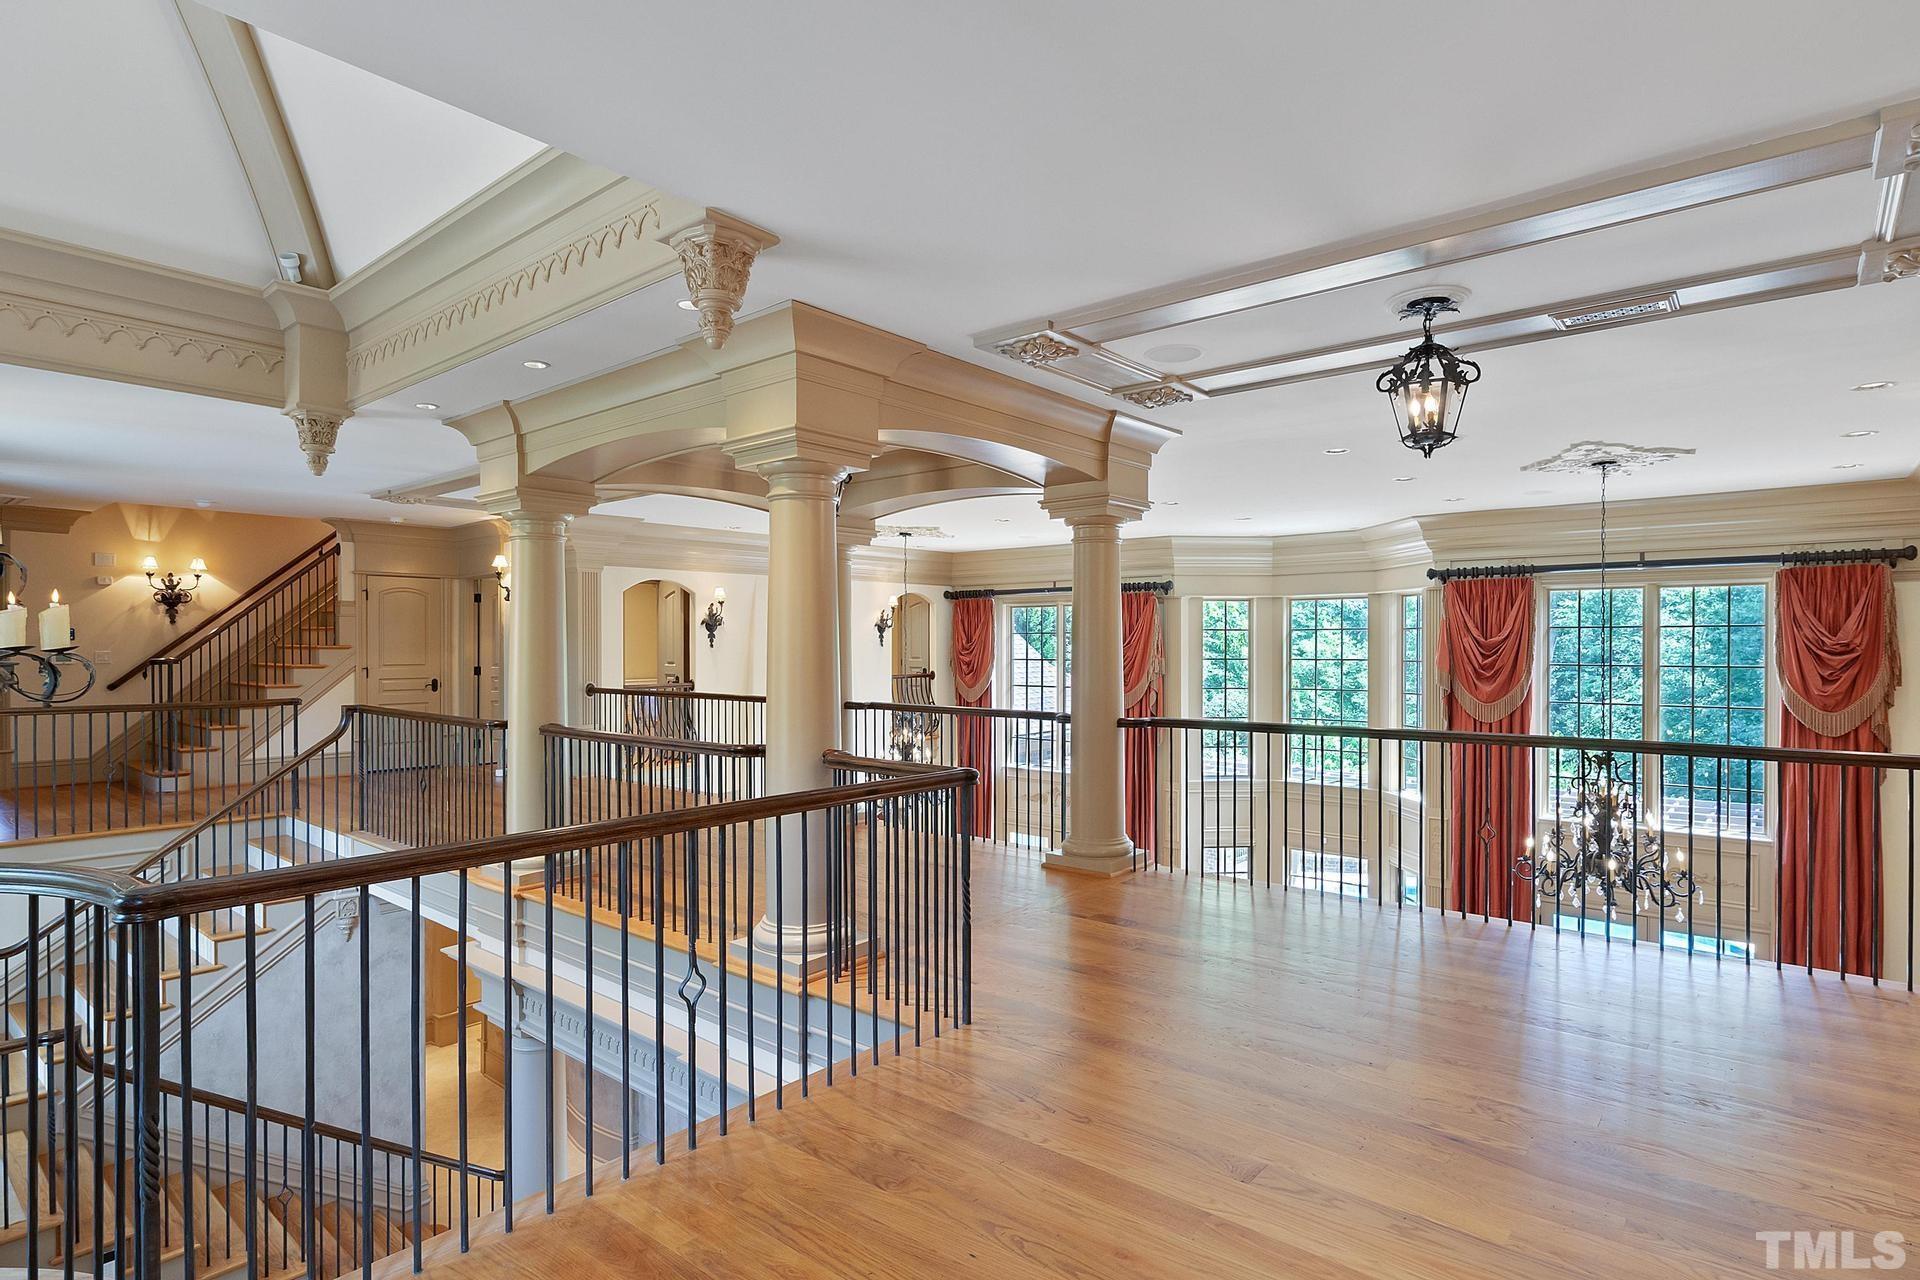 Gorgeous floors, moldings, trim and lighting extend into the upper hallways.